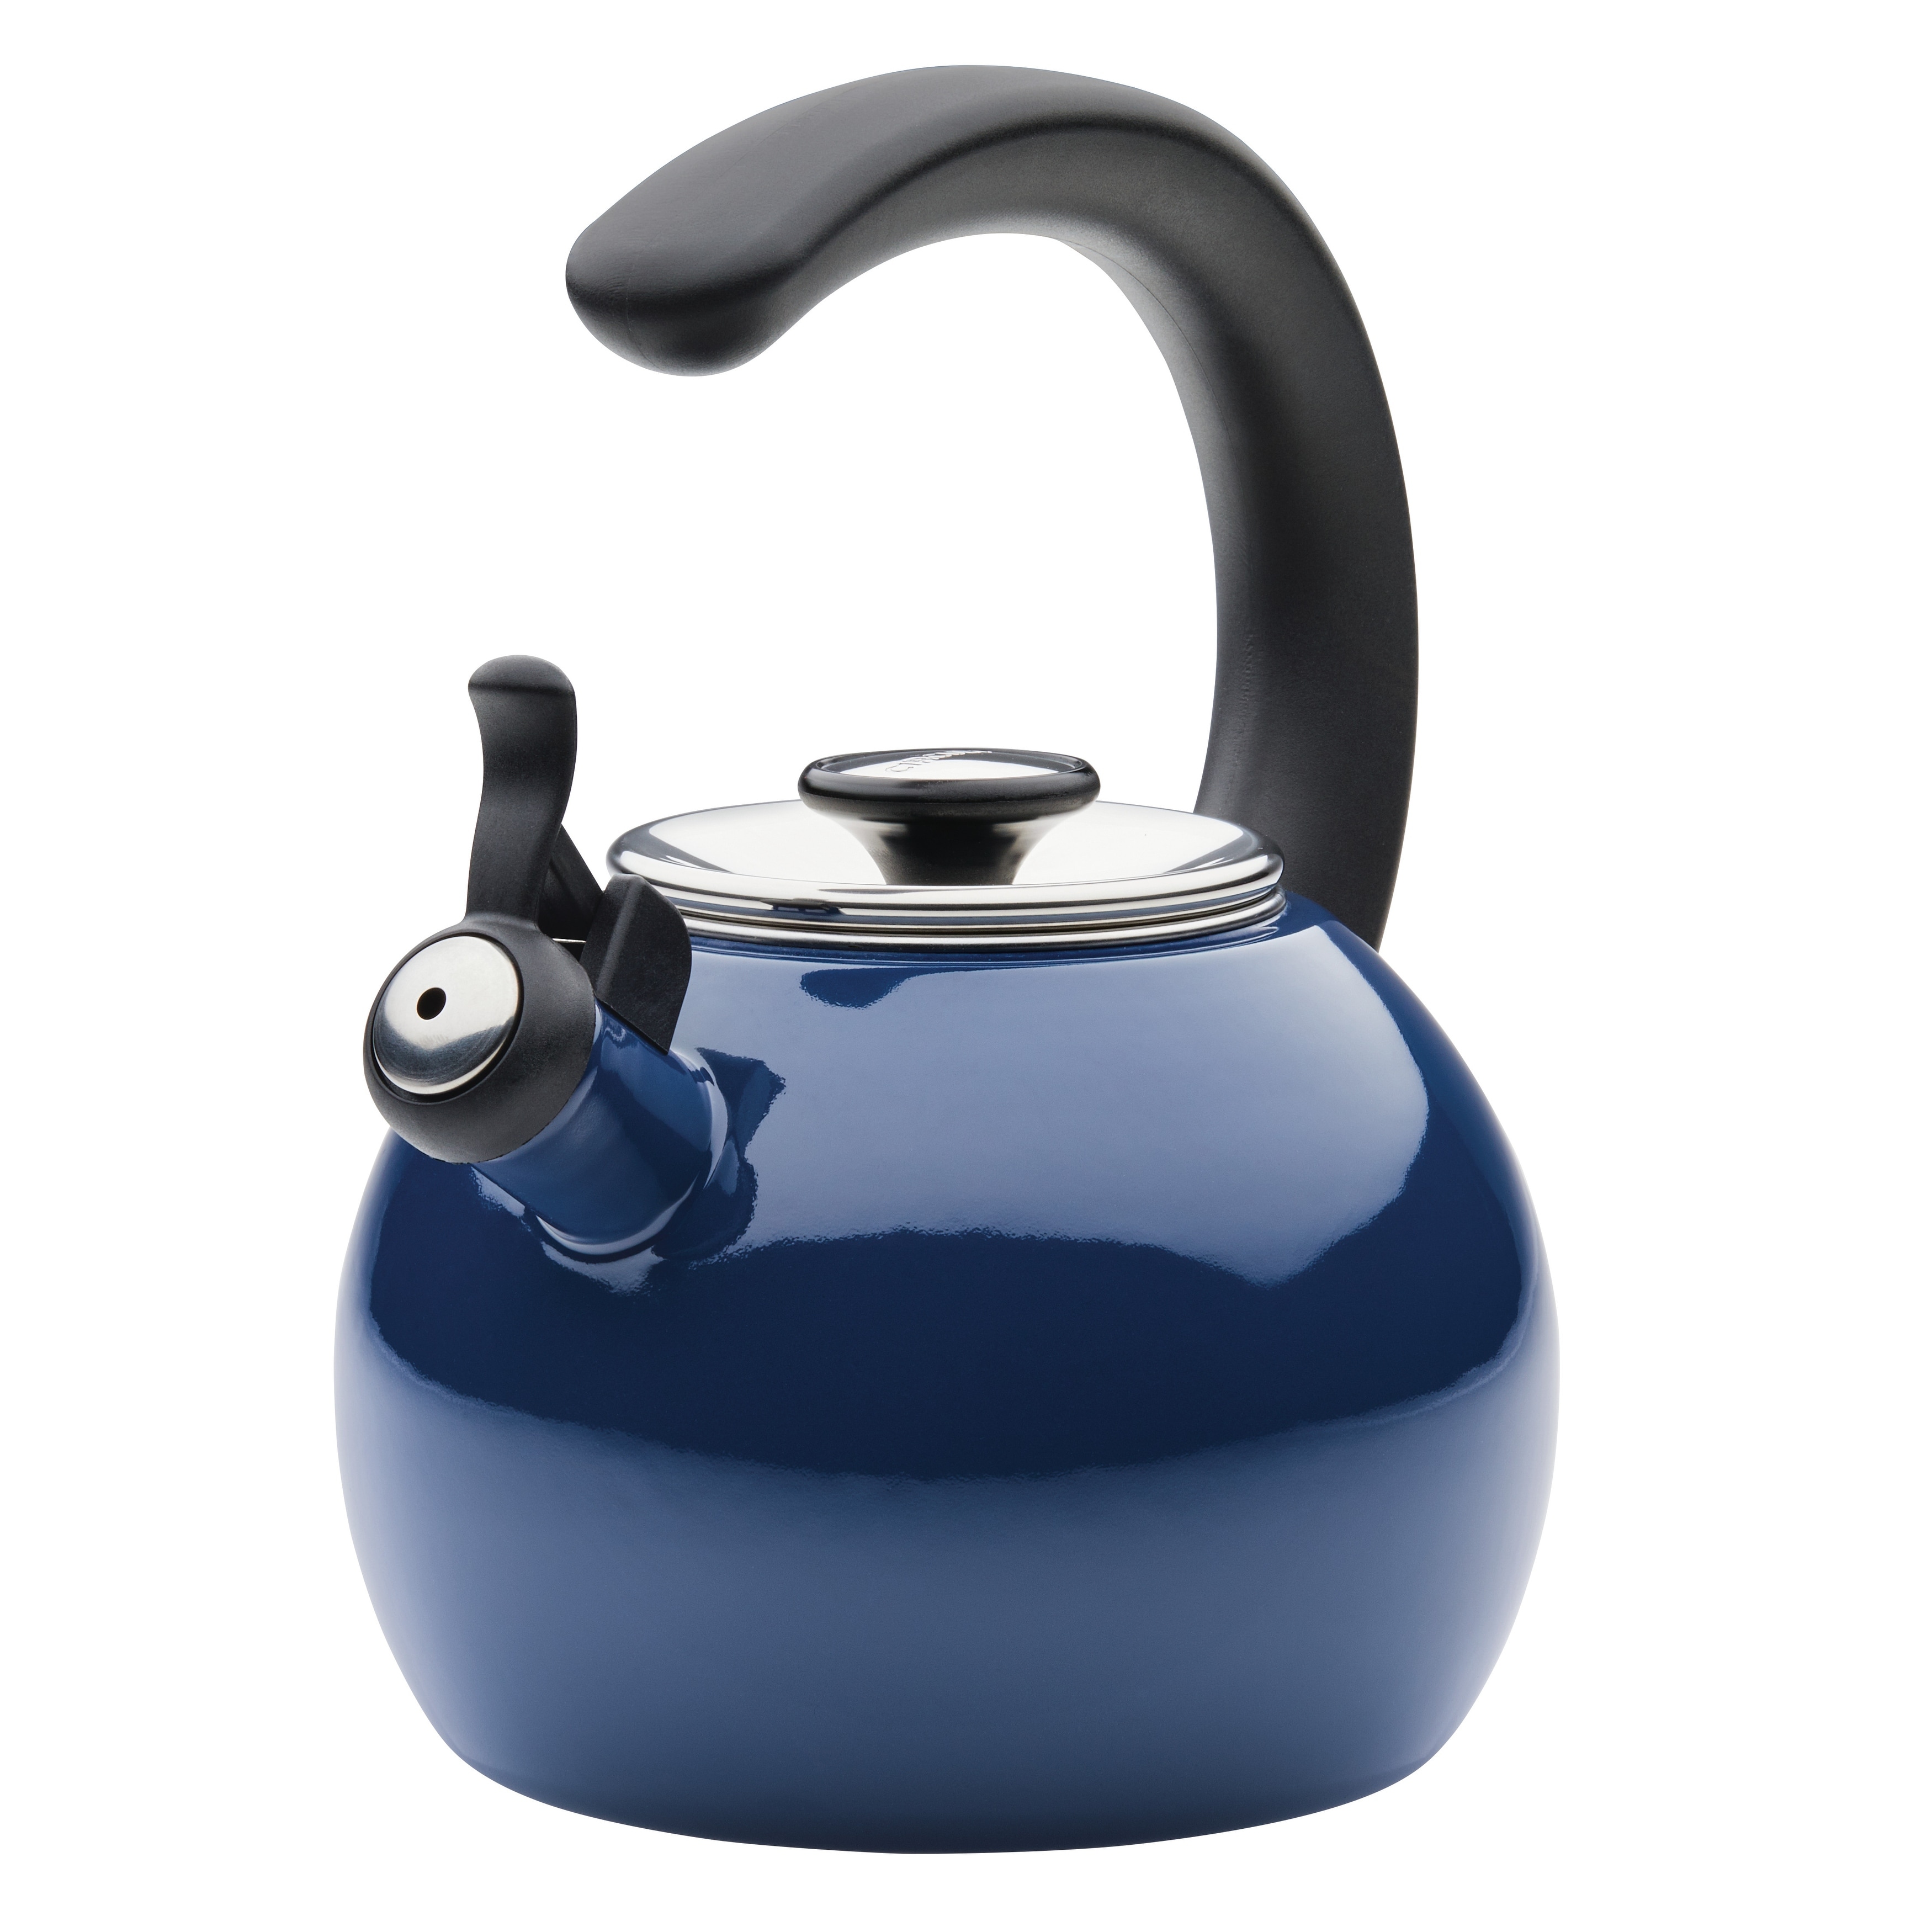 https://ak1.ostkcdn.com/images/products/is/images/direct/b5d559f2f0bac8964e0ba9ff1eb3c6b704e69254/Circulon-Enamel-on-Steel-Whistling-Induction-Teakettle-With-Flip-Up-Spout%2C-2-Quart%2C-Navy.jpg